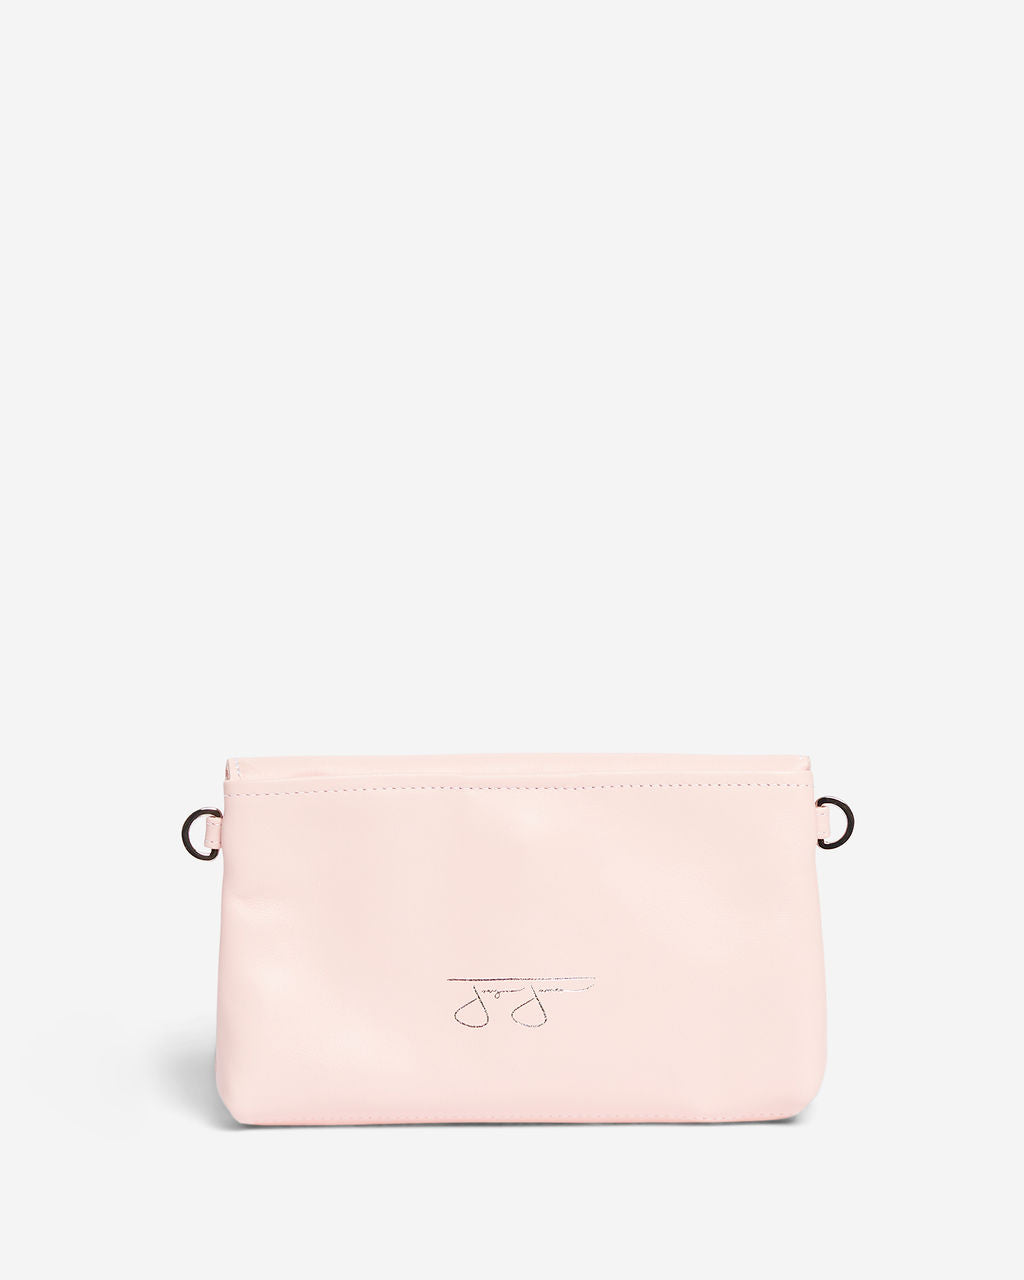 Norma Hipster Bag - Pale Pink  Joey James, The Label   